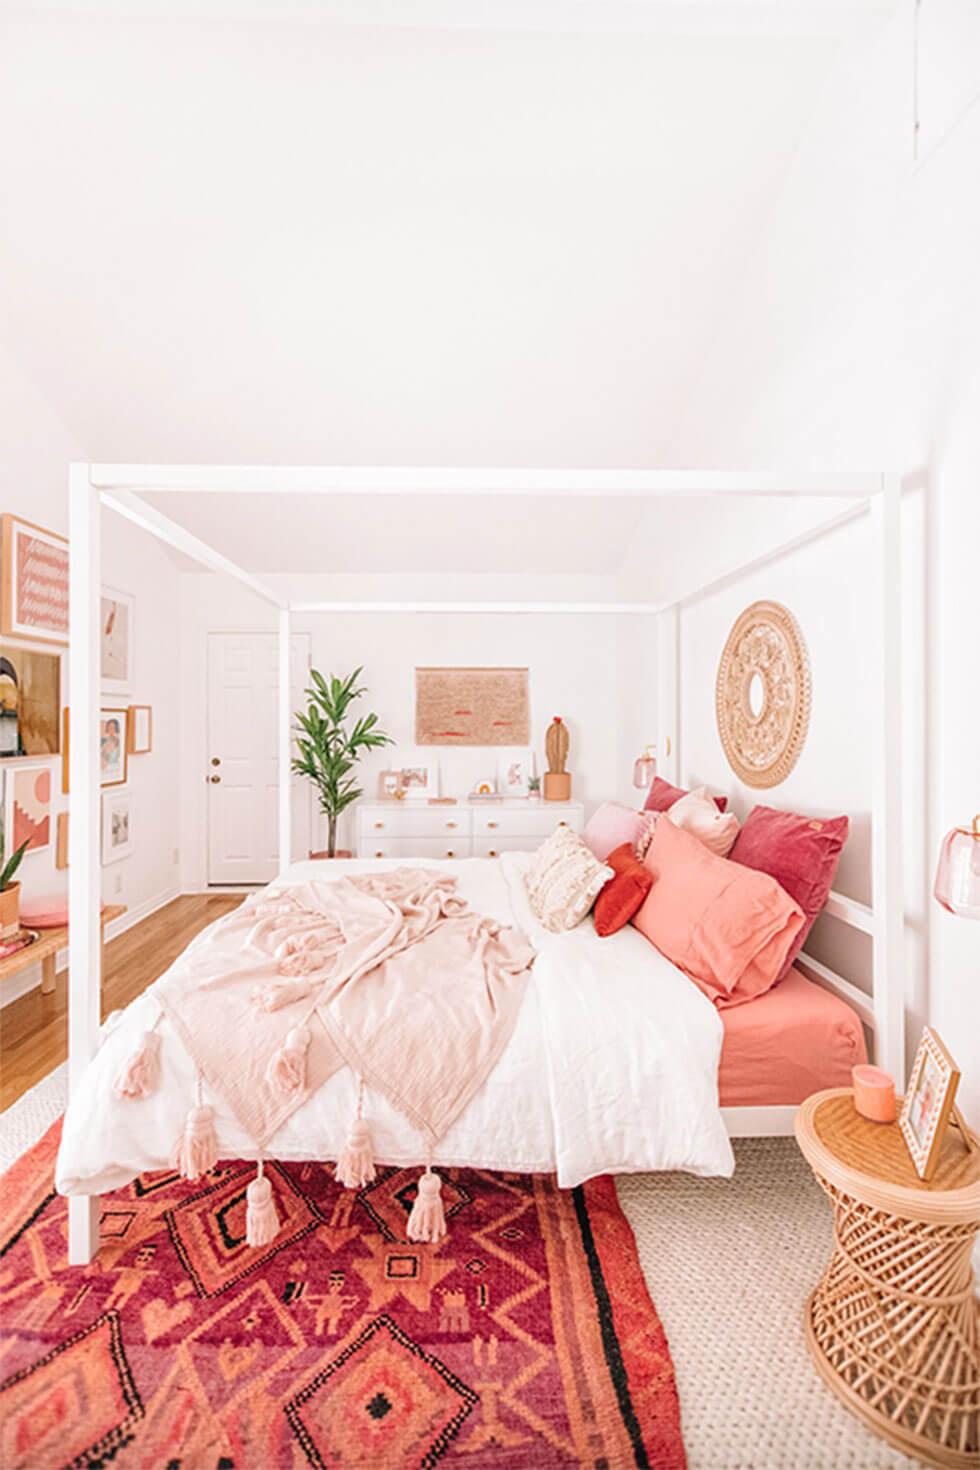 White bedroom with pink decor and canopy bed.